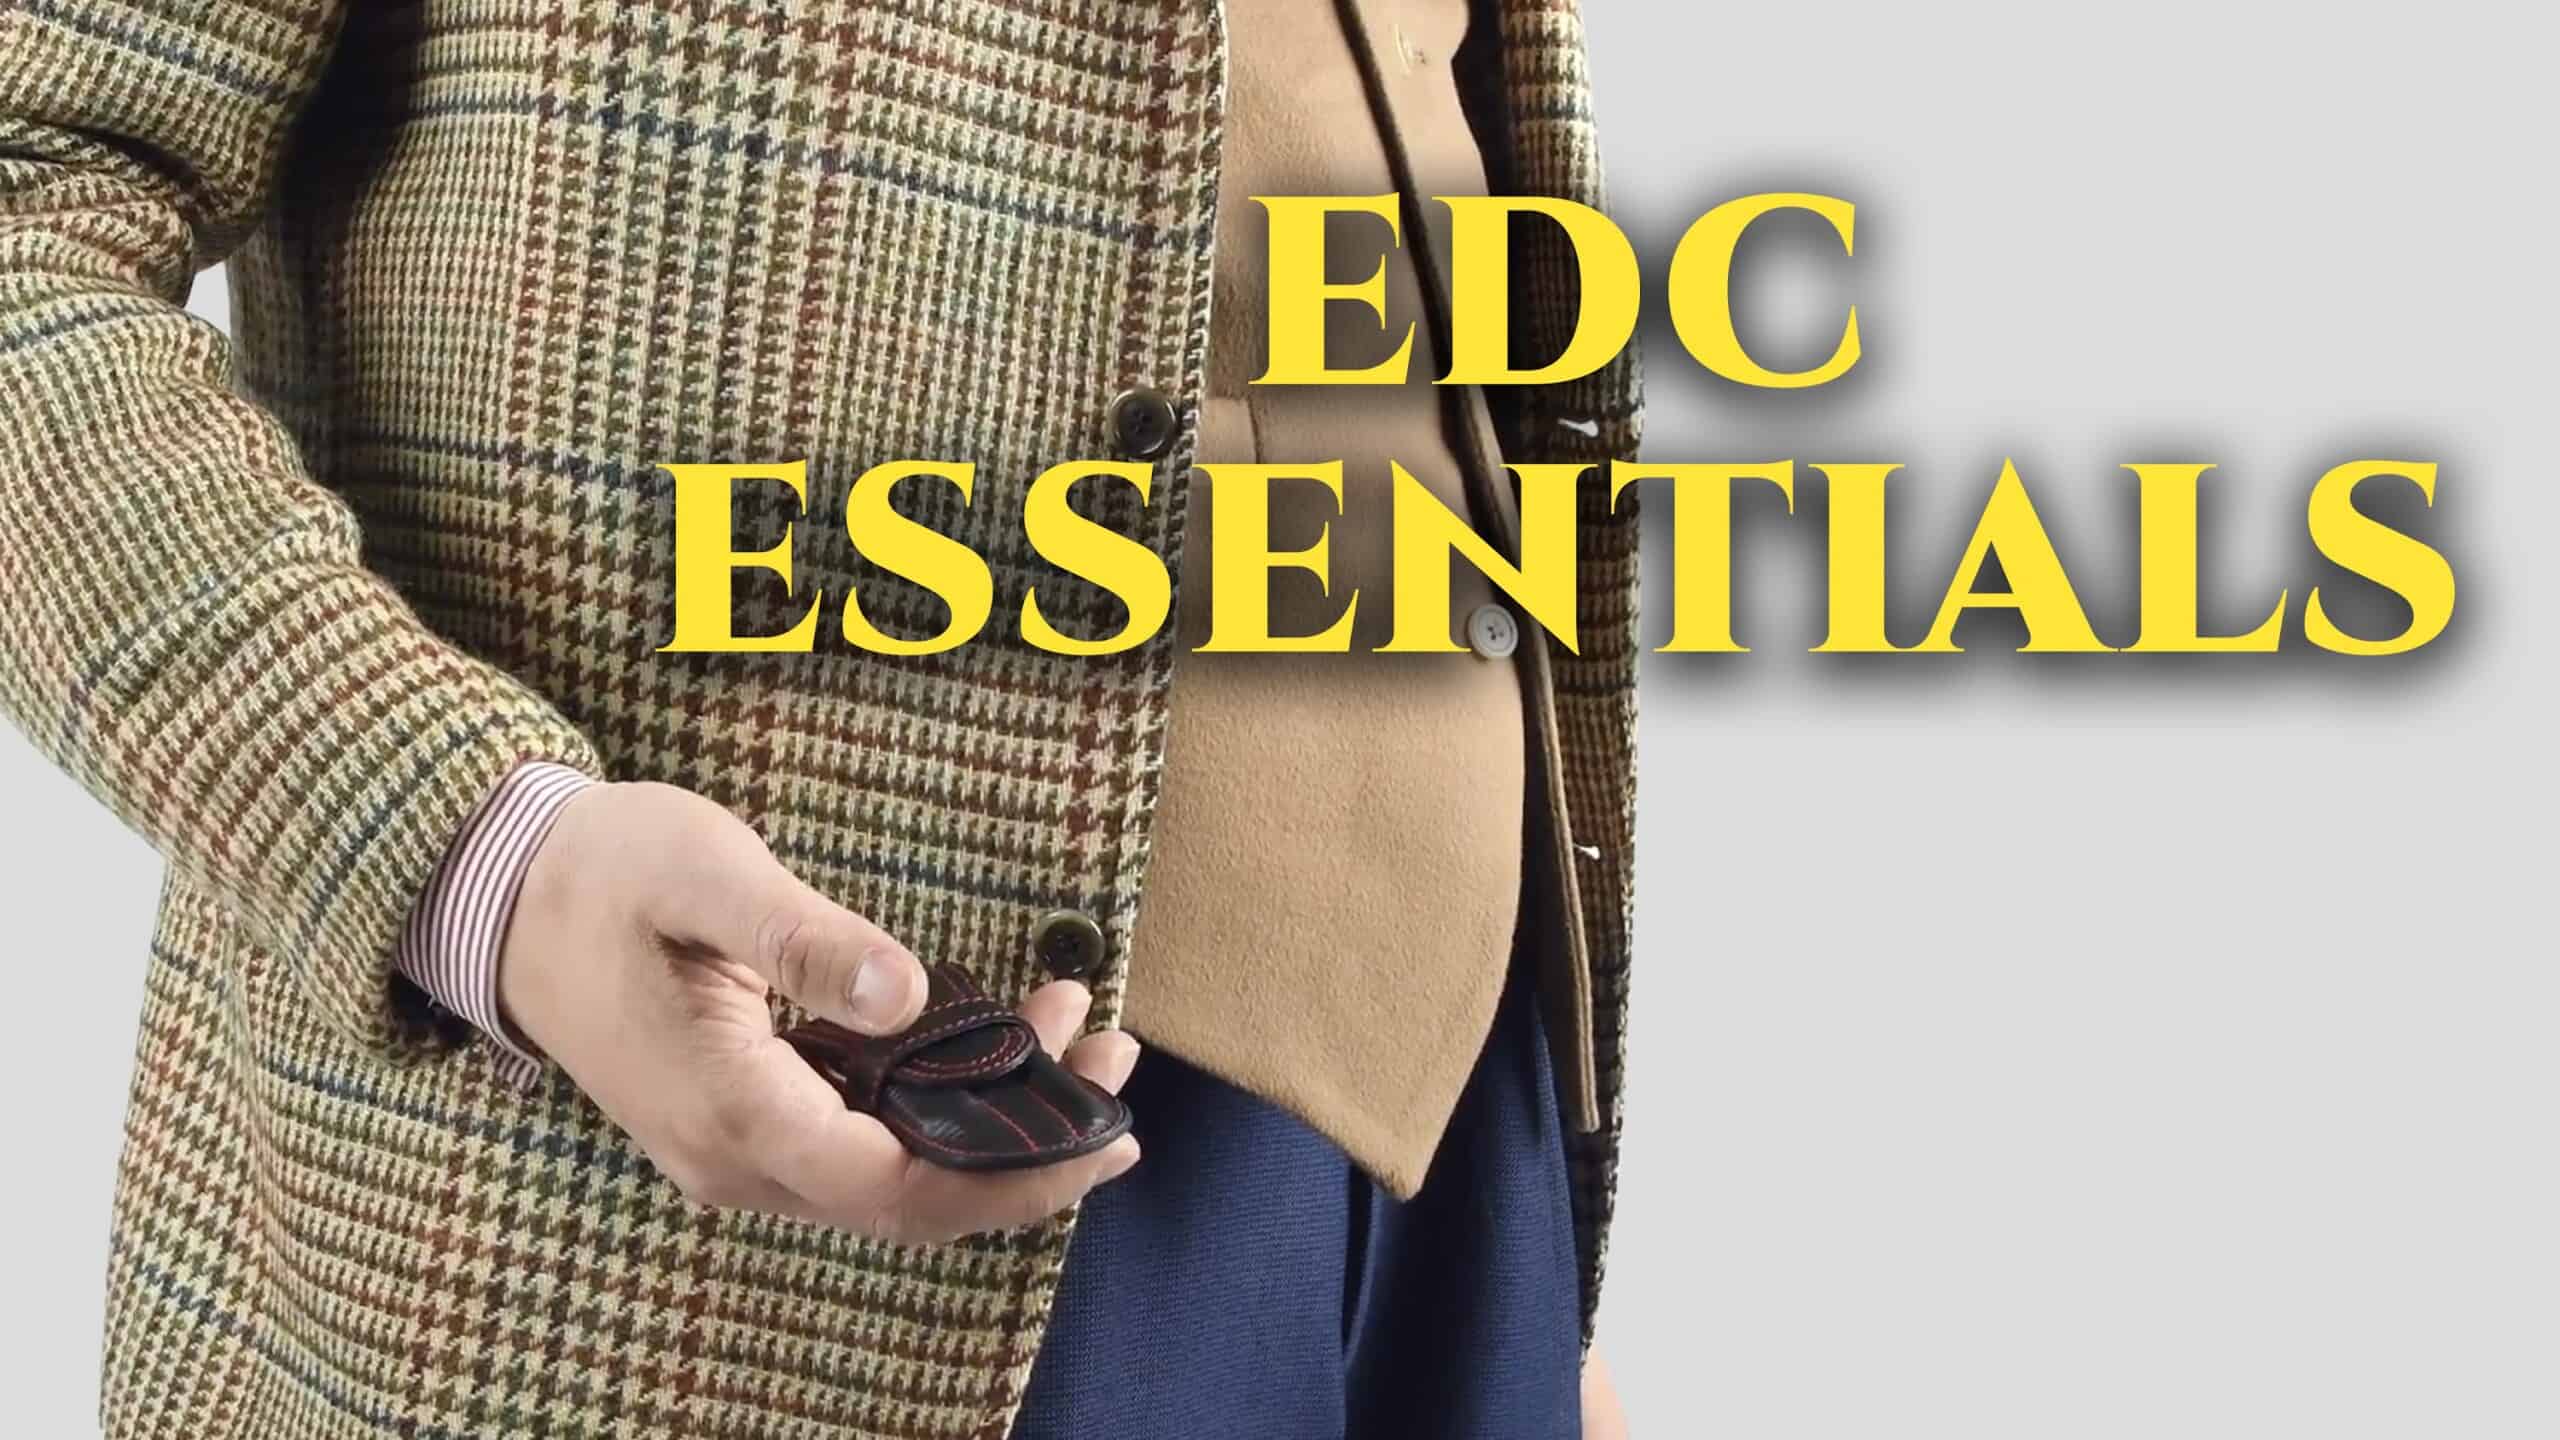 everyday carry essentials scaled